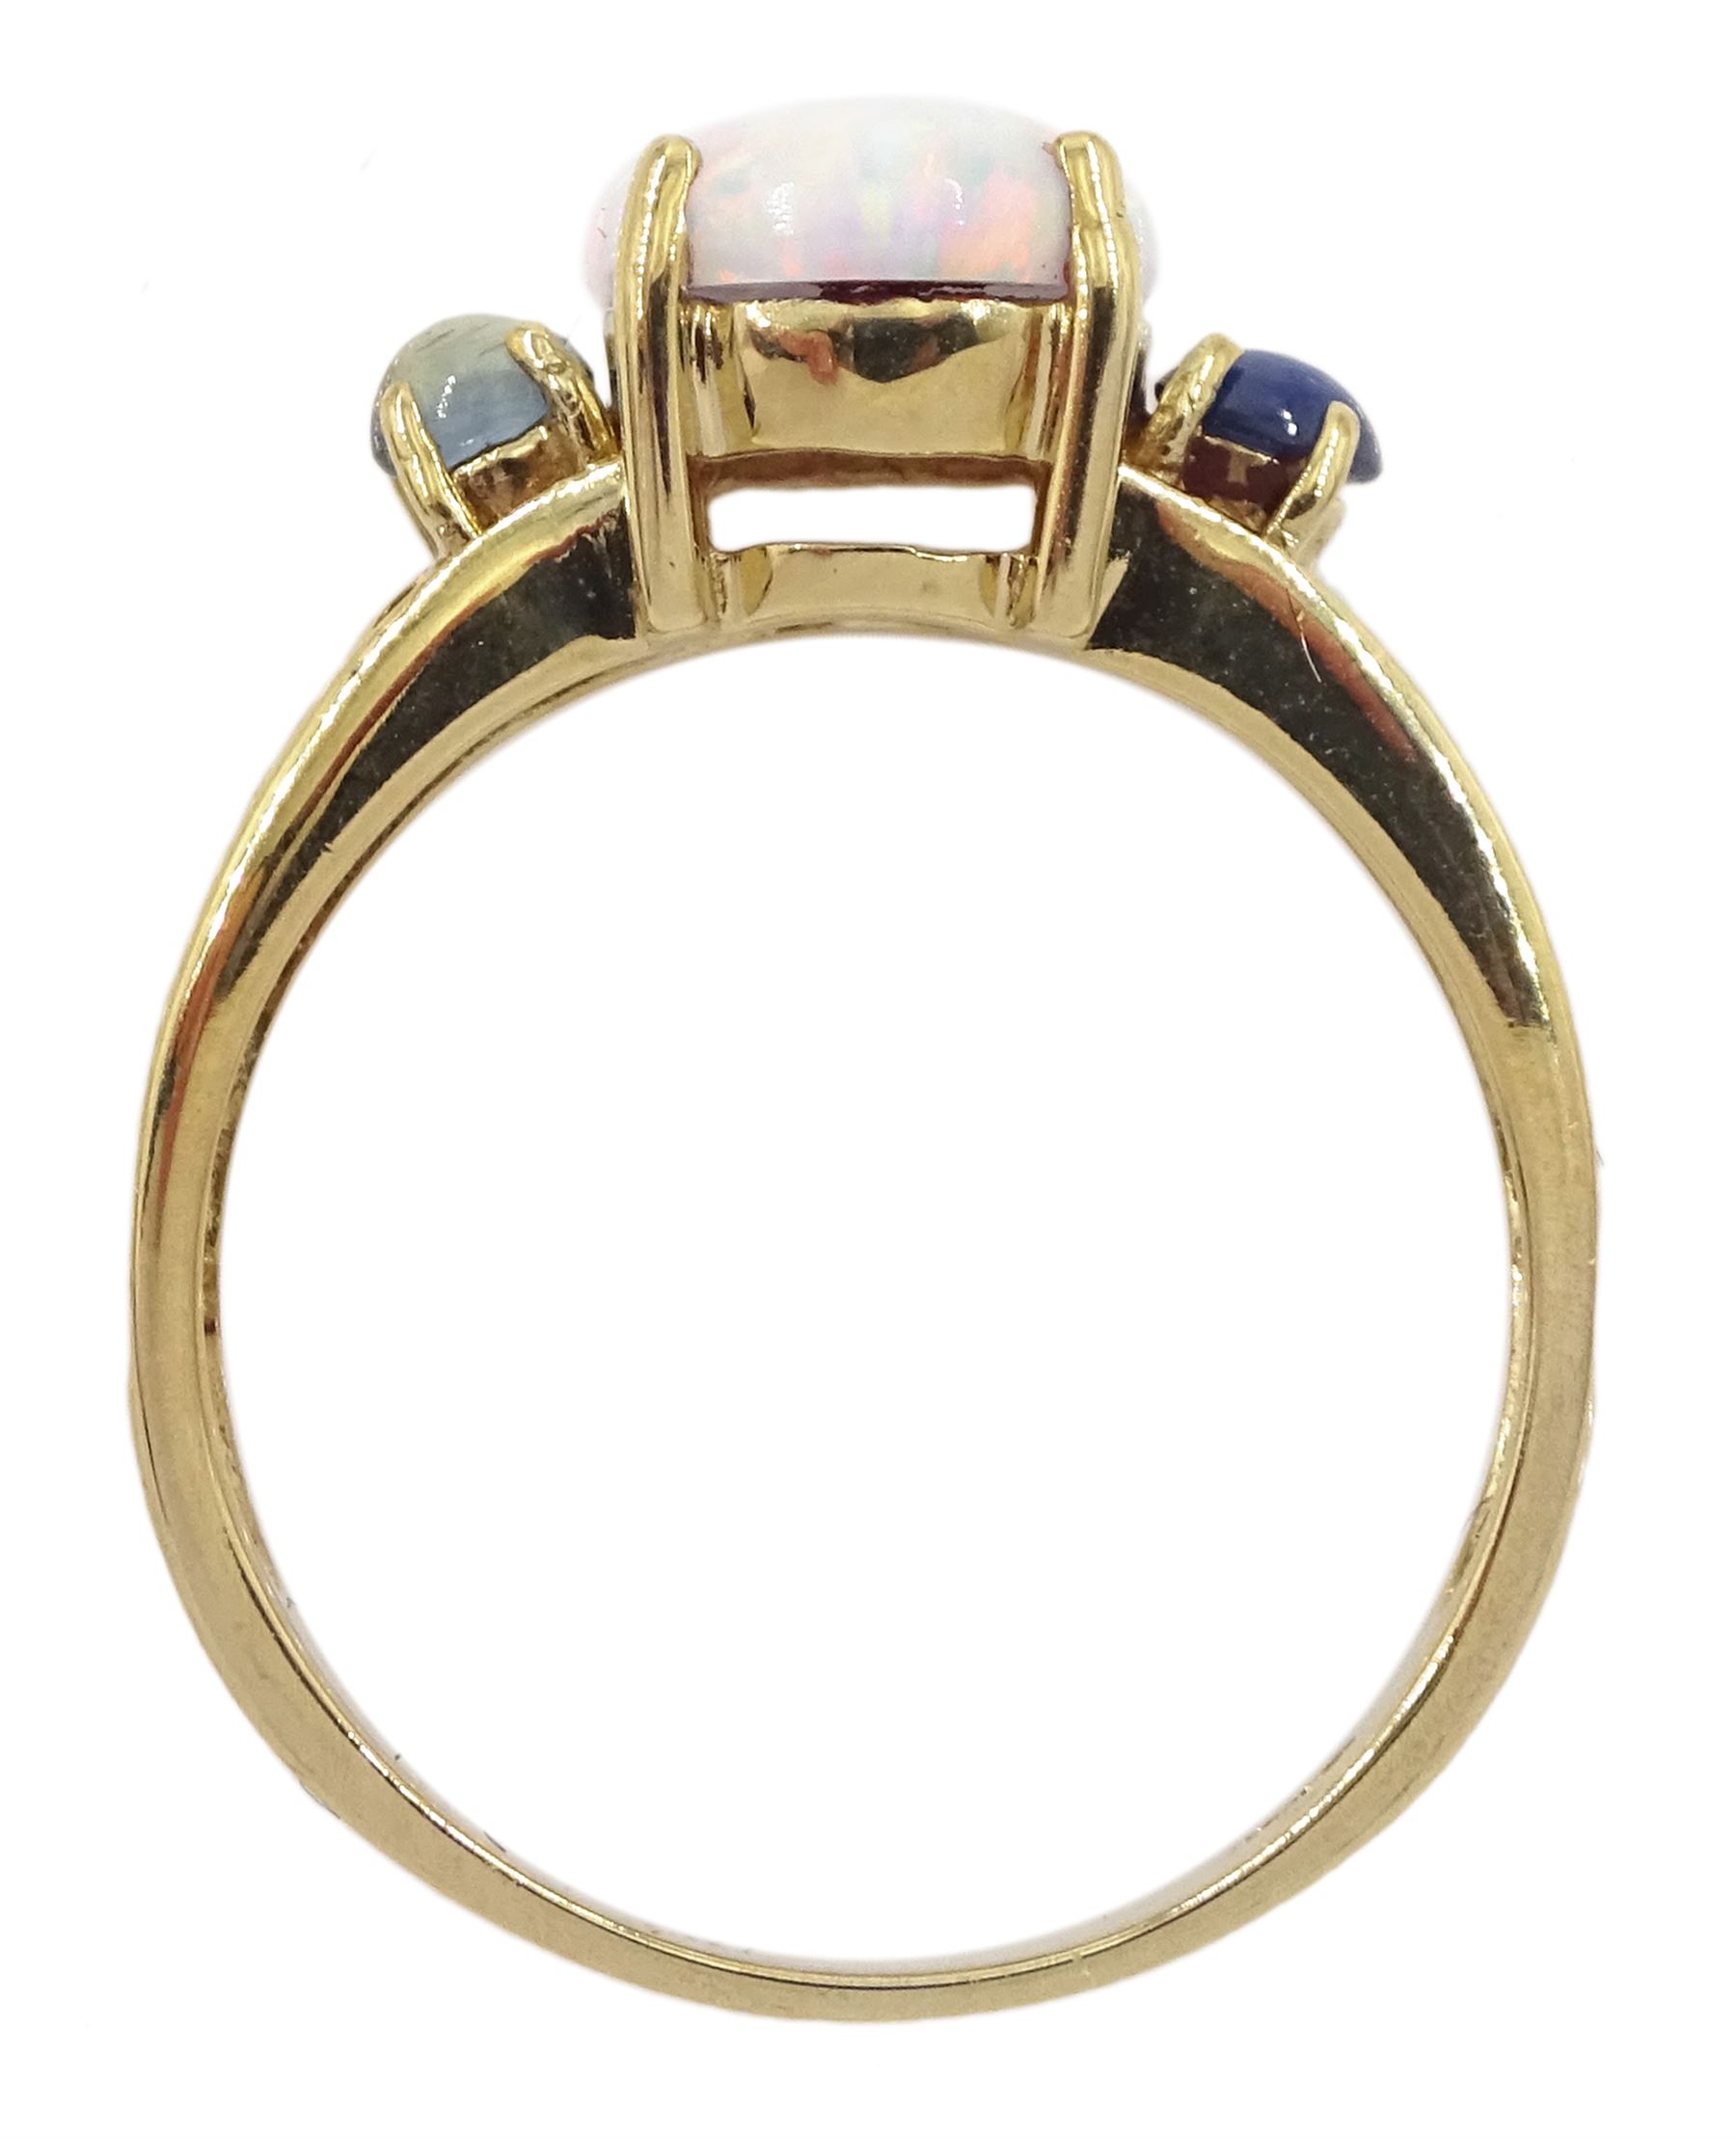 9ct gold three stone opal and sapphire ring - Image 4 of 4